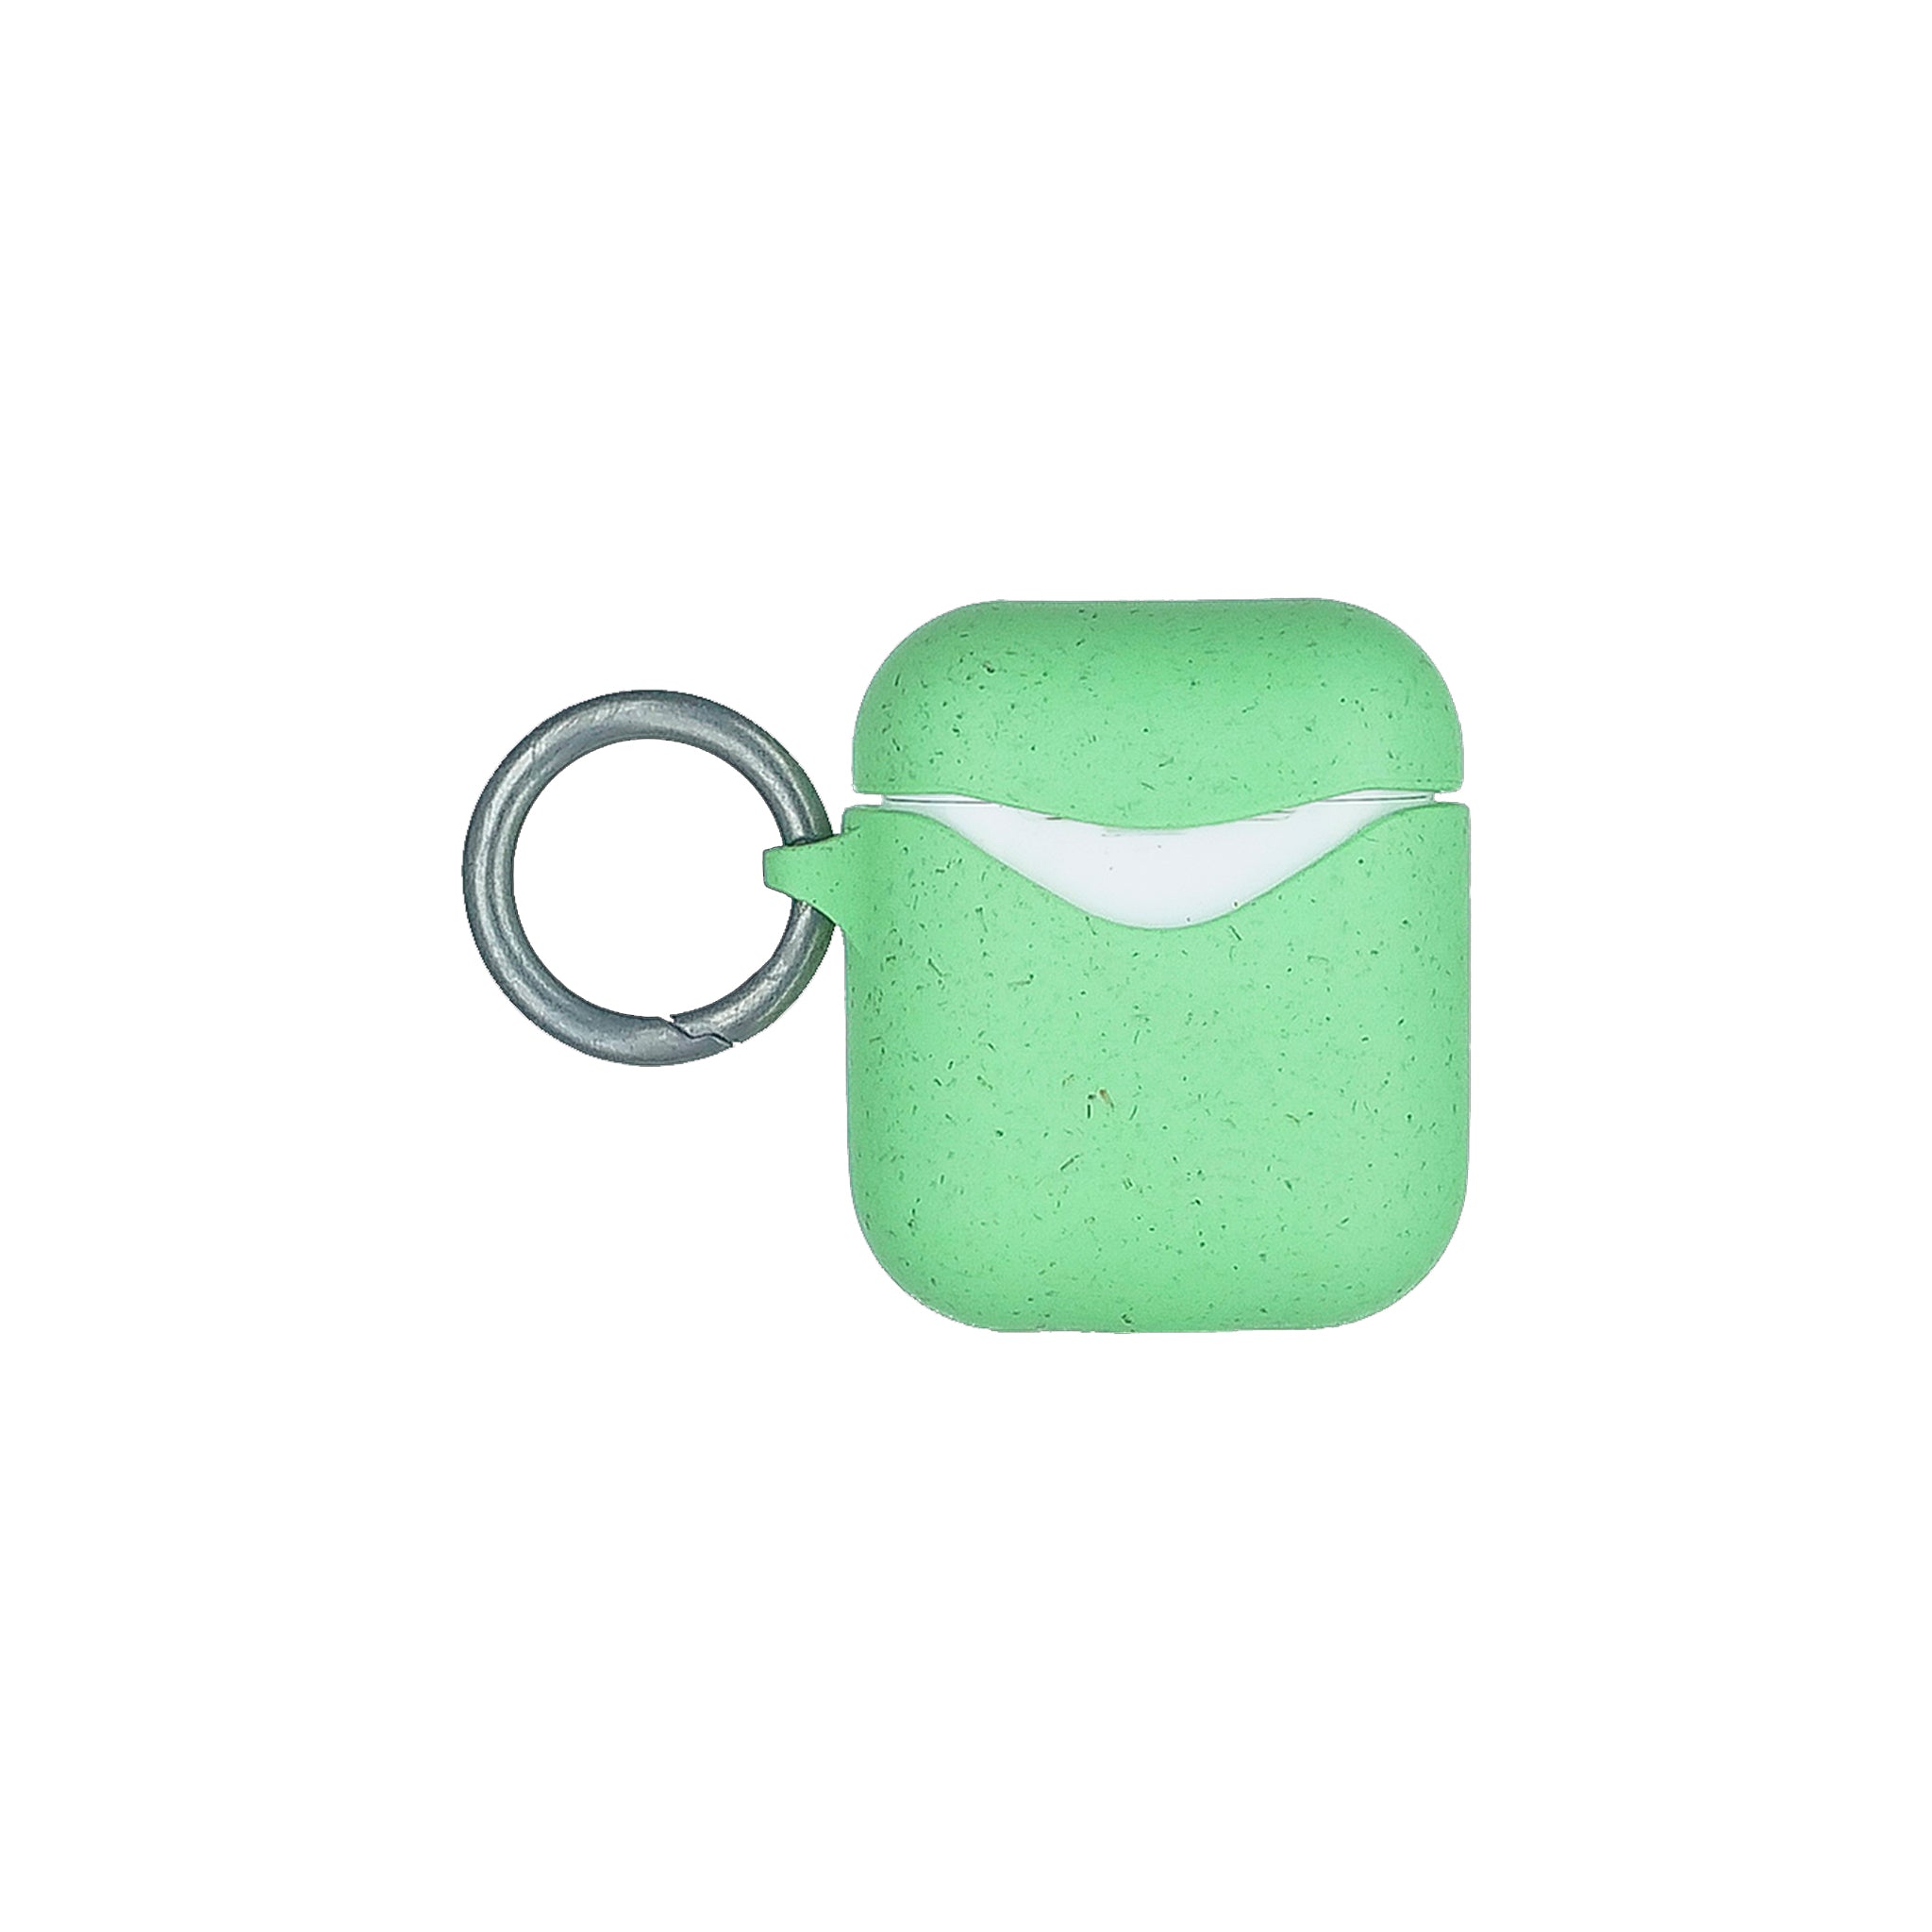 Pela - Eco Friendly Case For Apple Airpods - Neo Mint